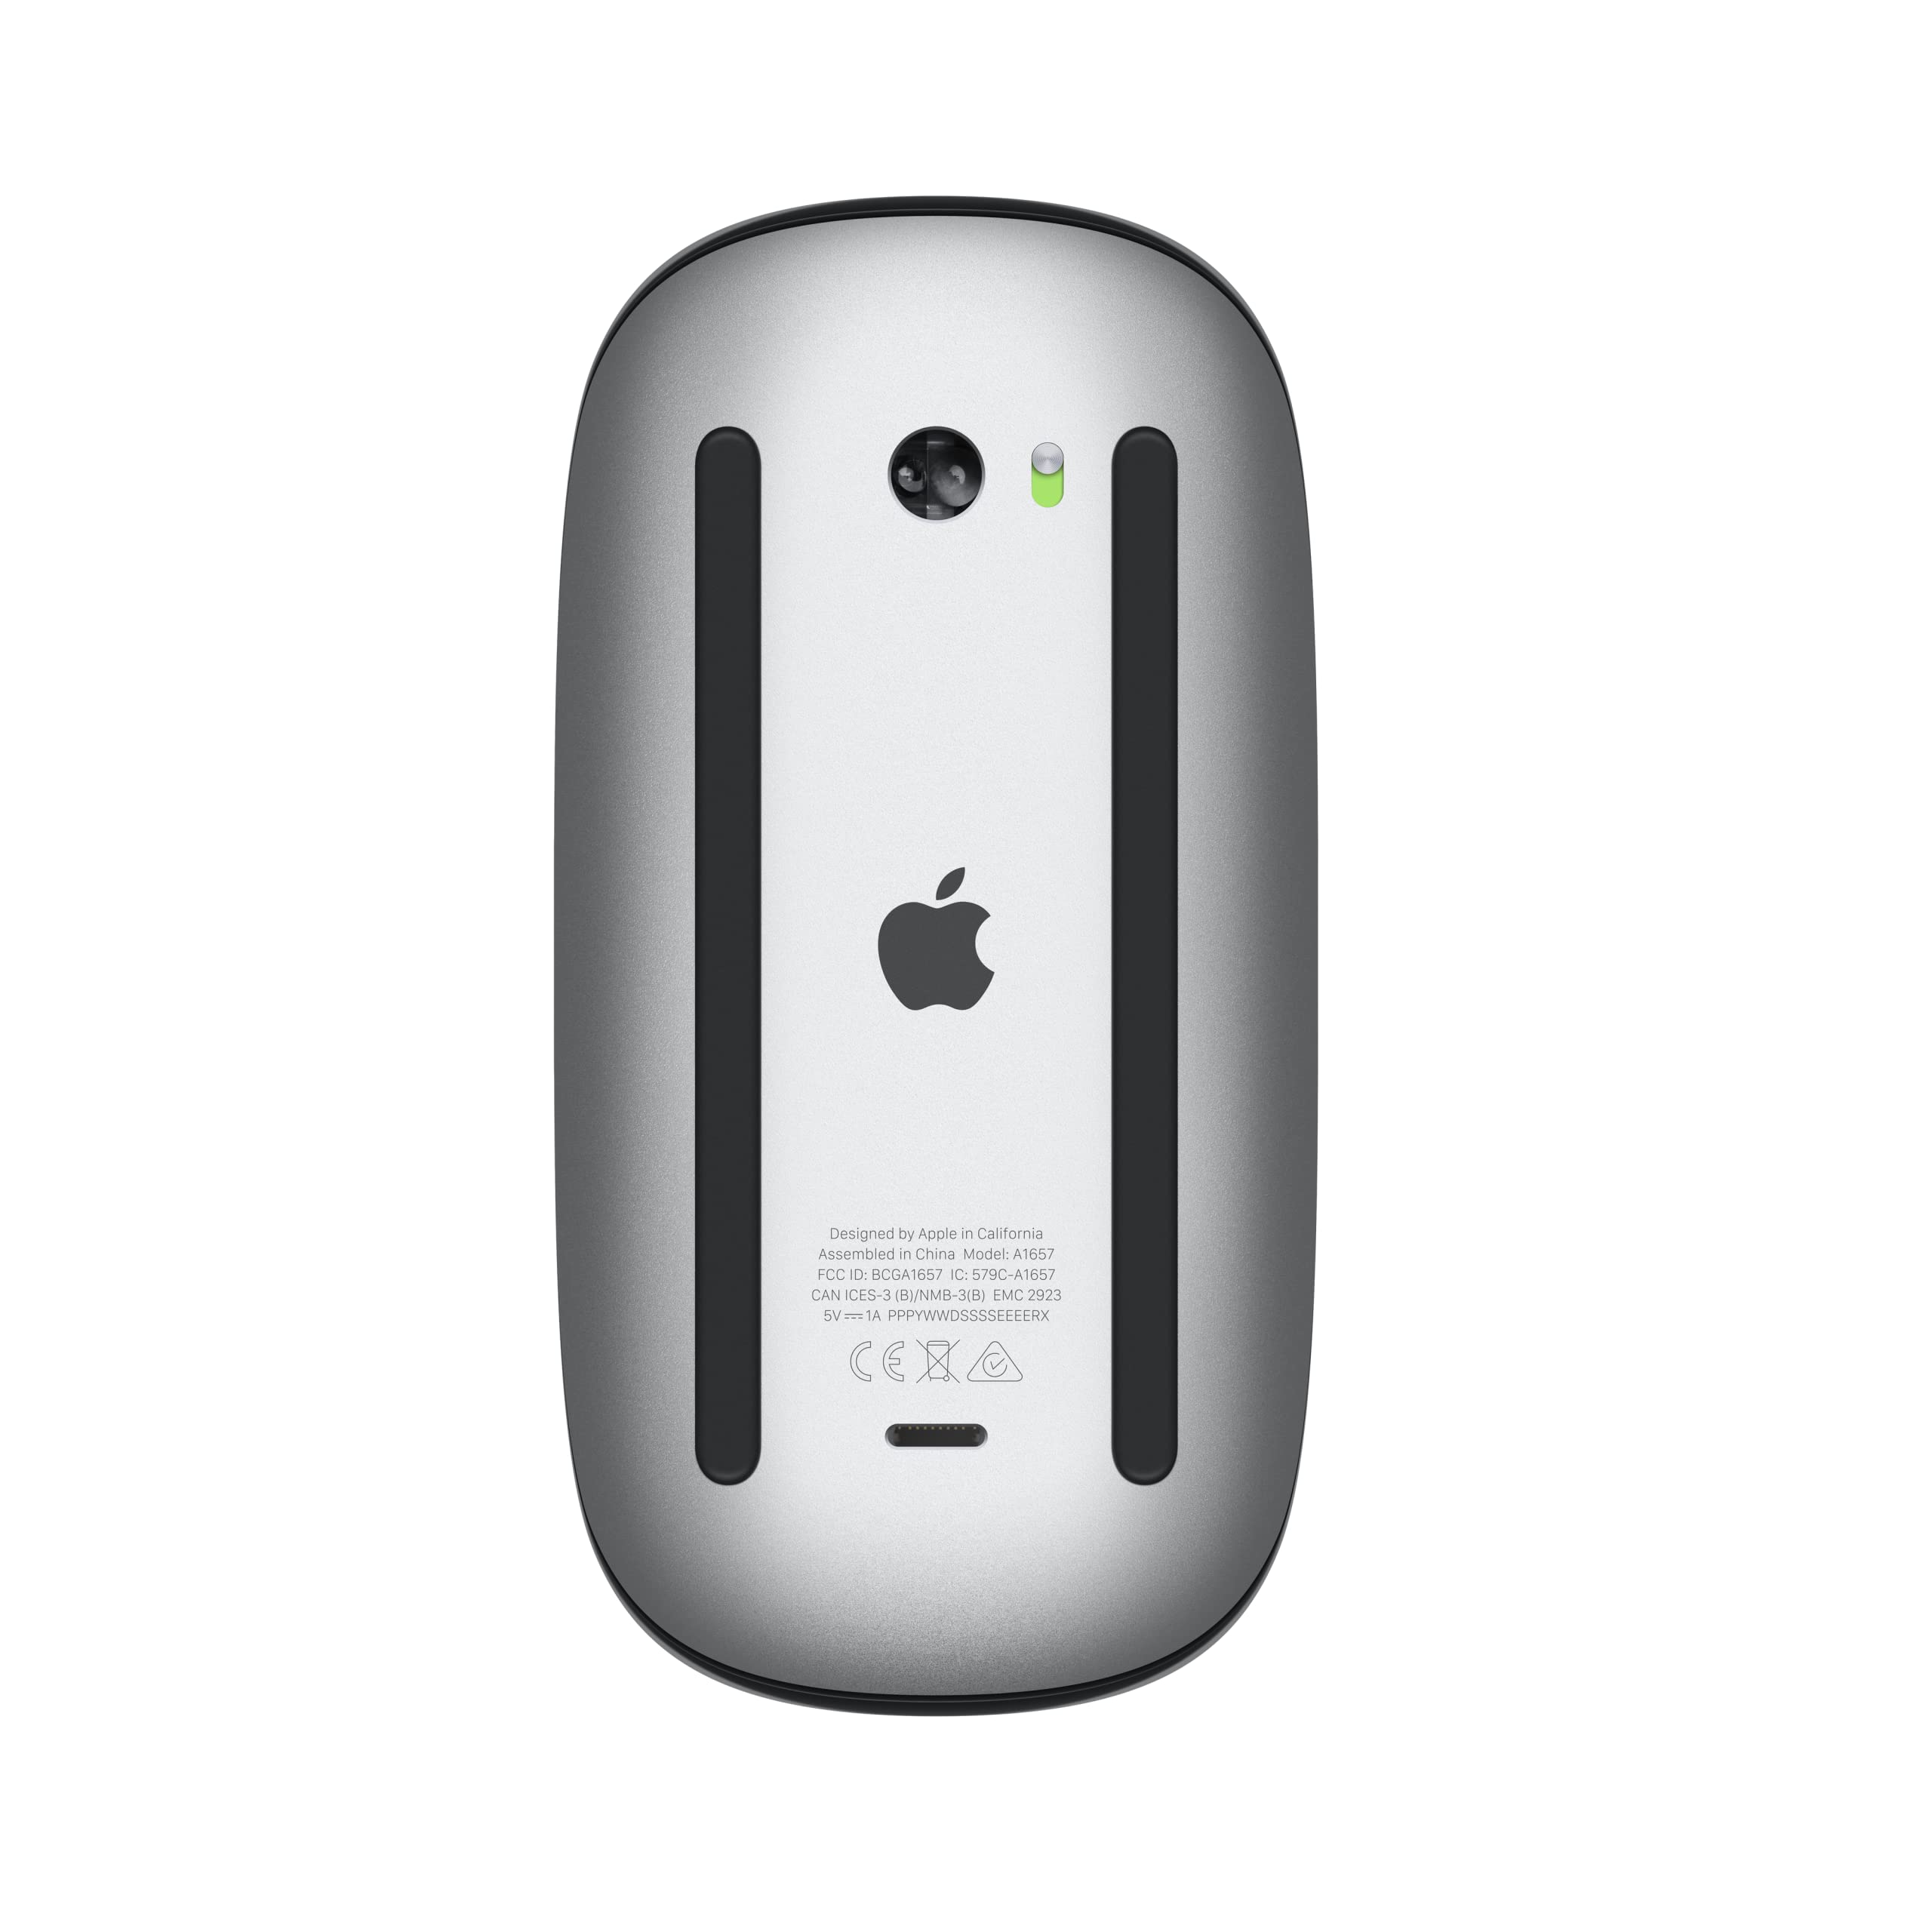 Apple Magic Mouse: Wireless, Bluetooth, Rechargeable. Works with Mac or iPad; Multi-Touch Surface - Black